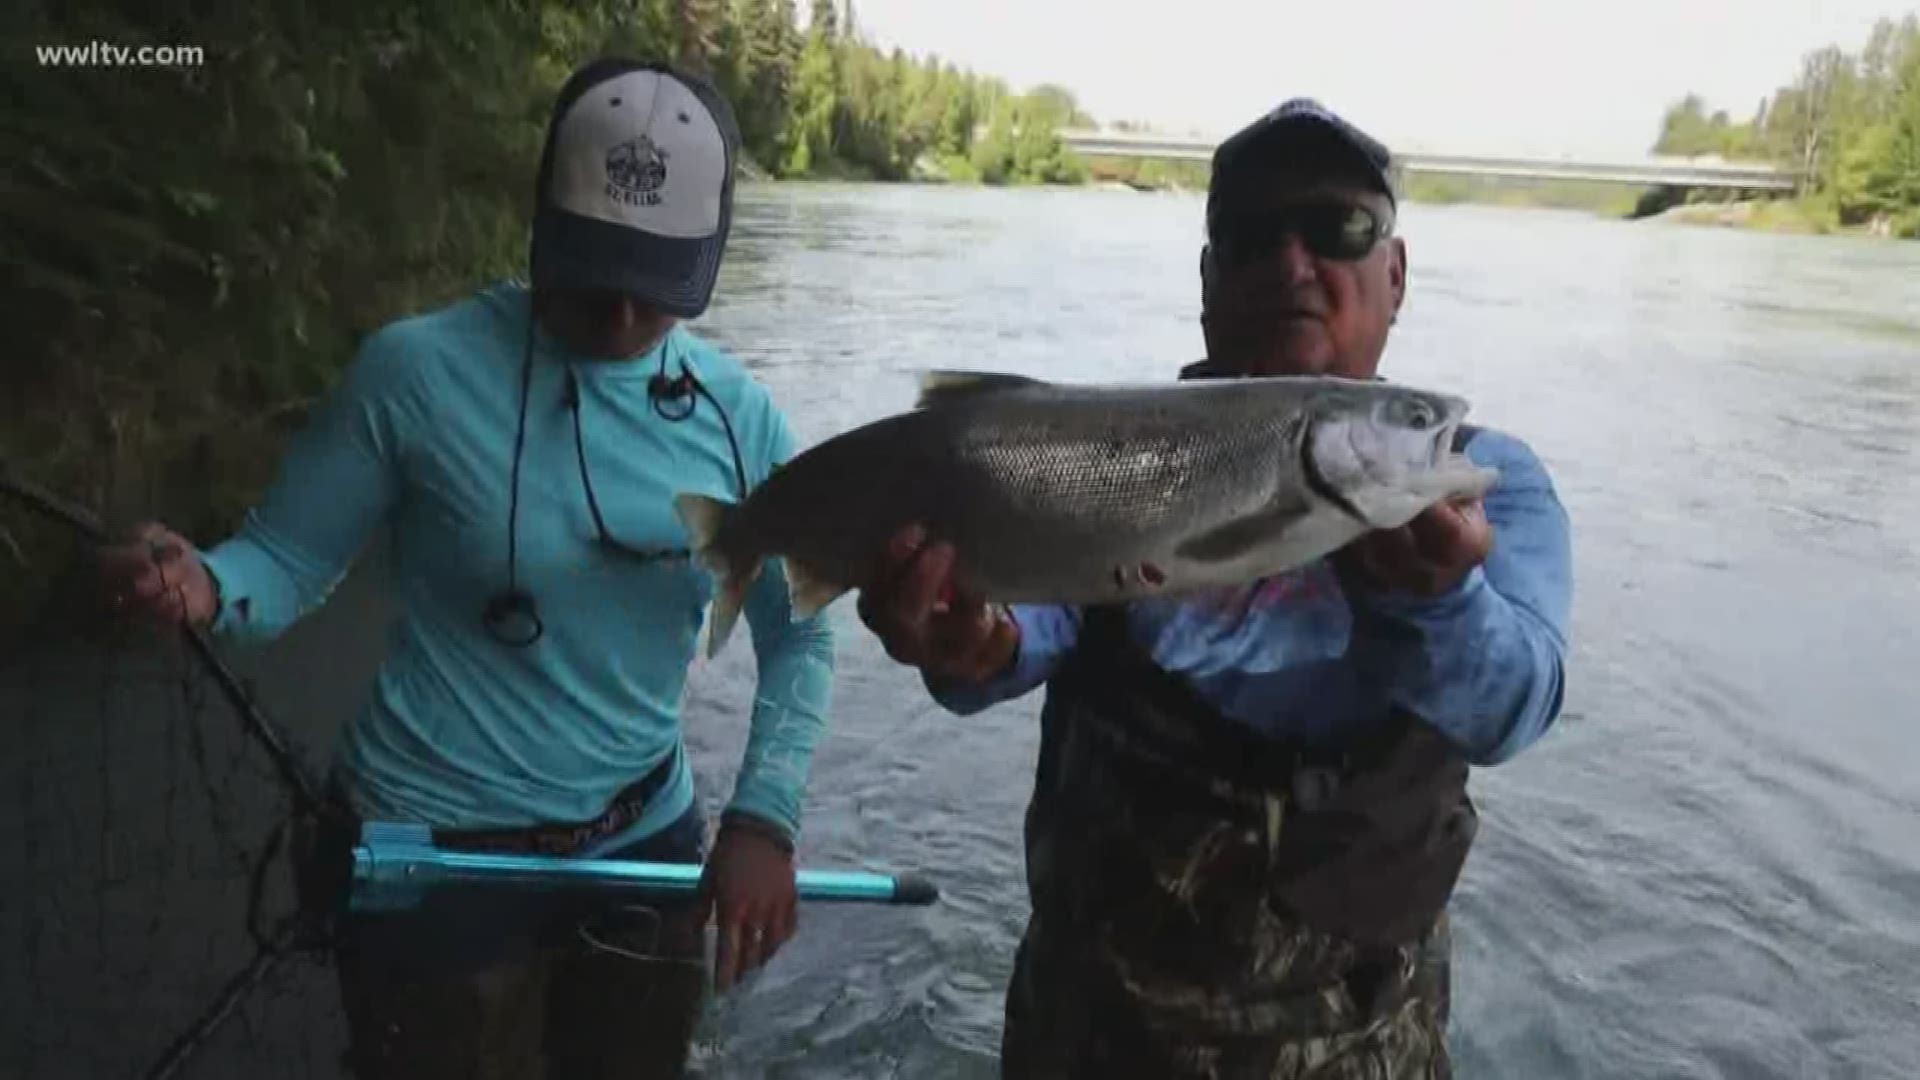 Don Debuc and company shows us his 'Flossing' Fishing Technique for catching Red Salmon.